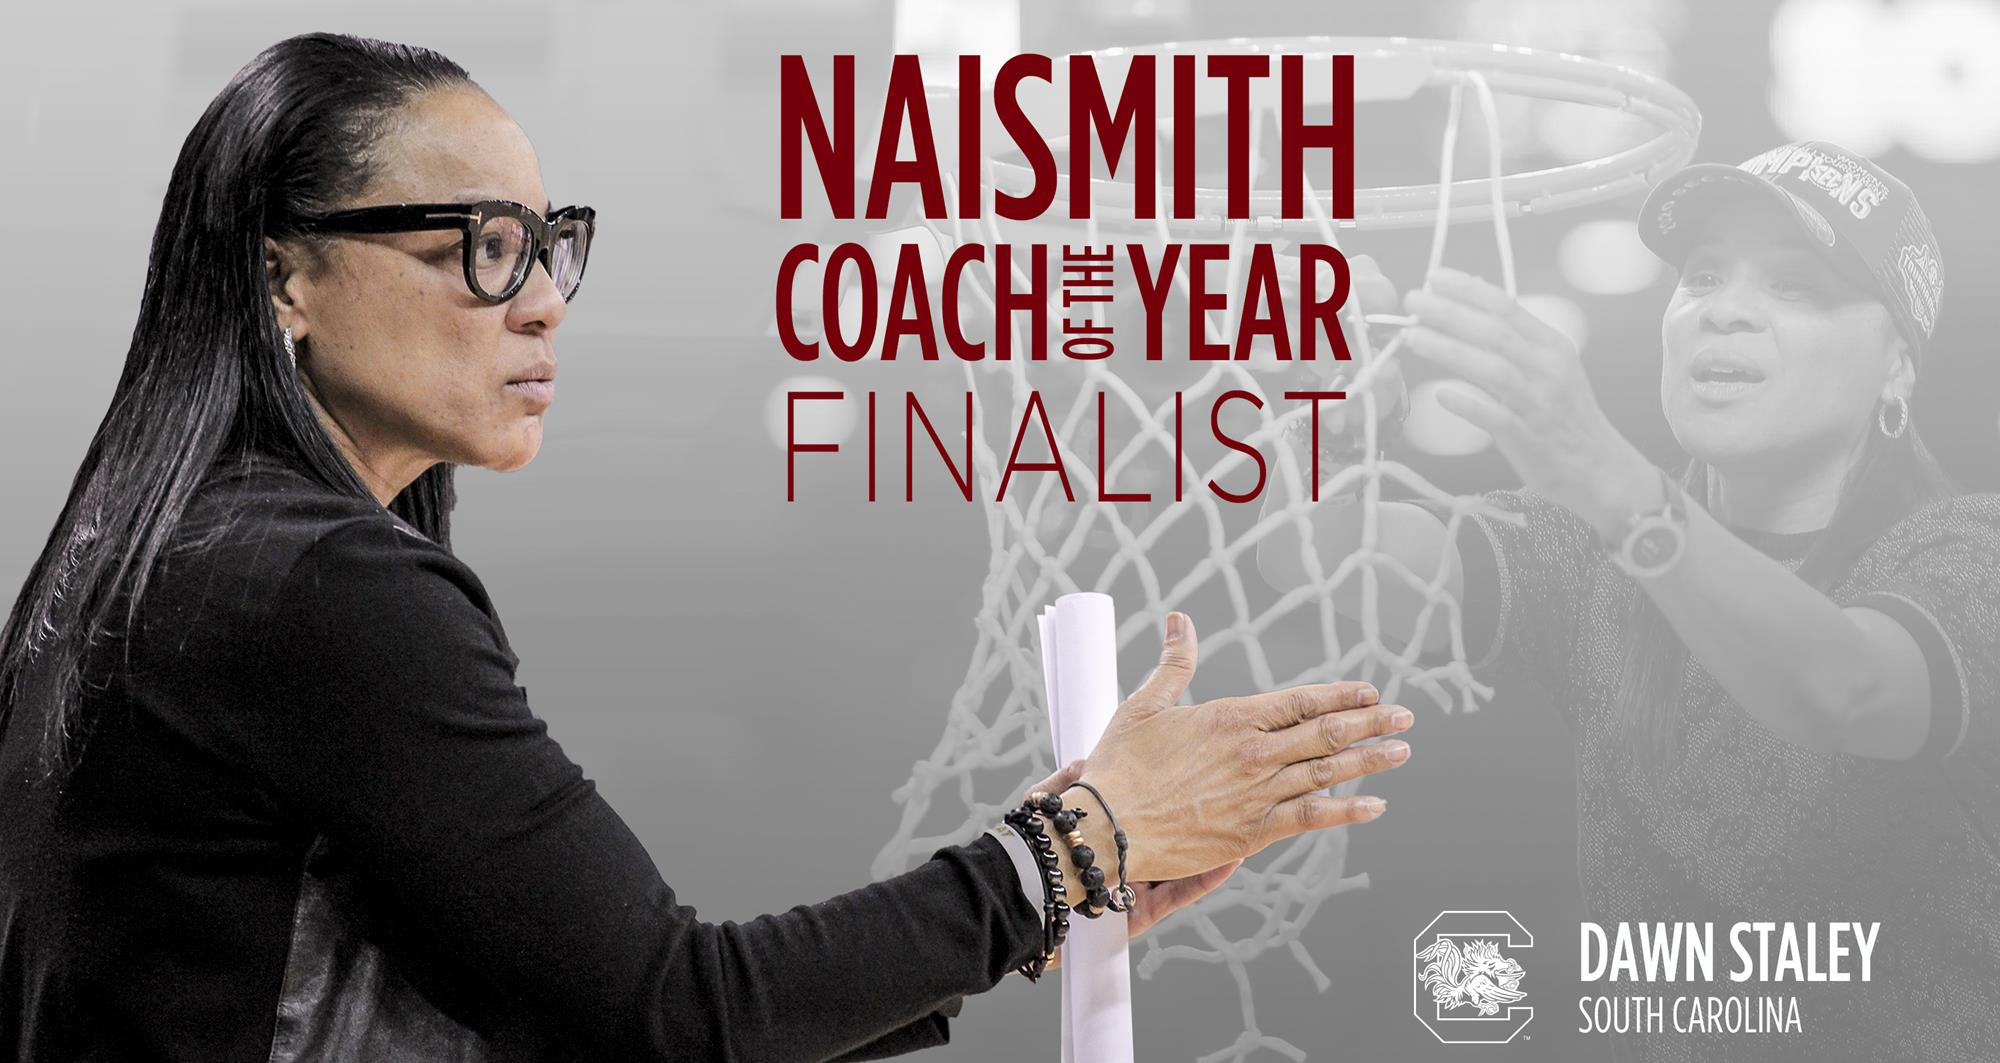 Staley Named Finalist for Naismith Coach of the Year